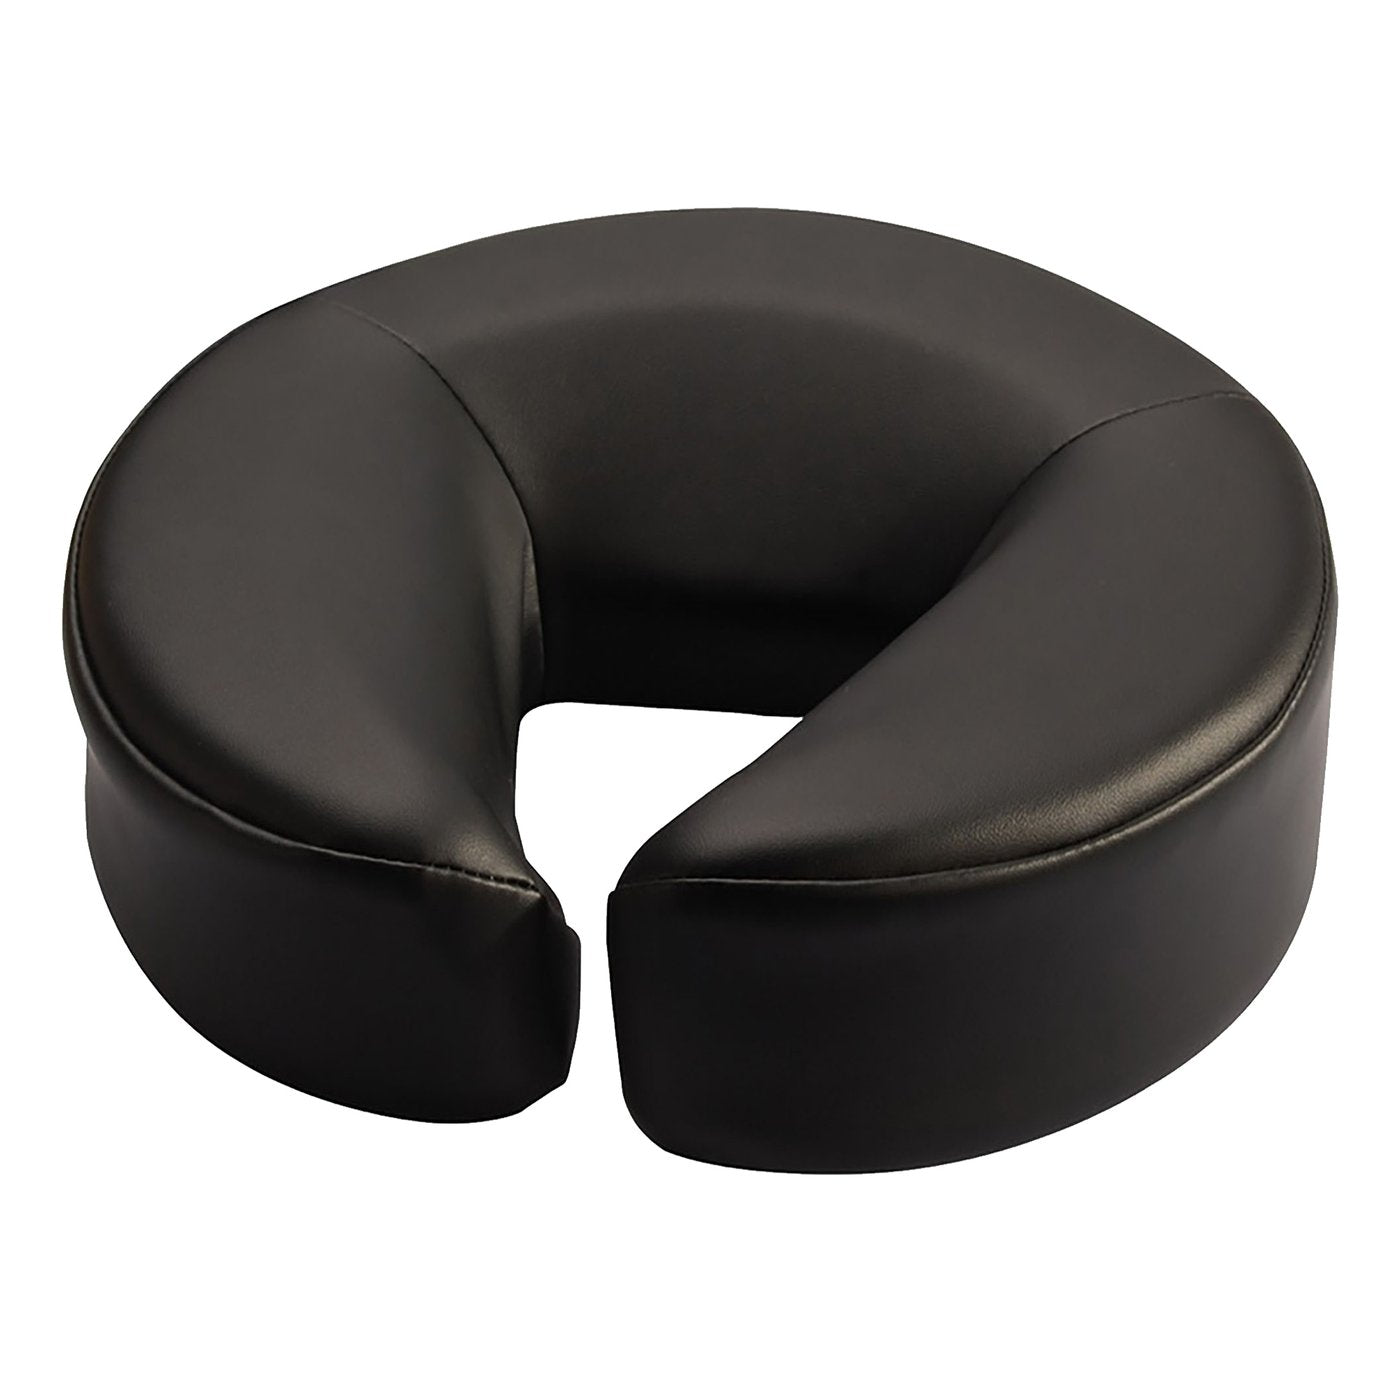 Universal Face Cushion Pillow for Massage Table